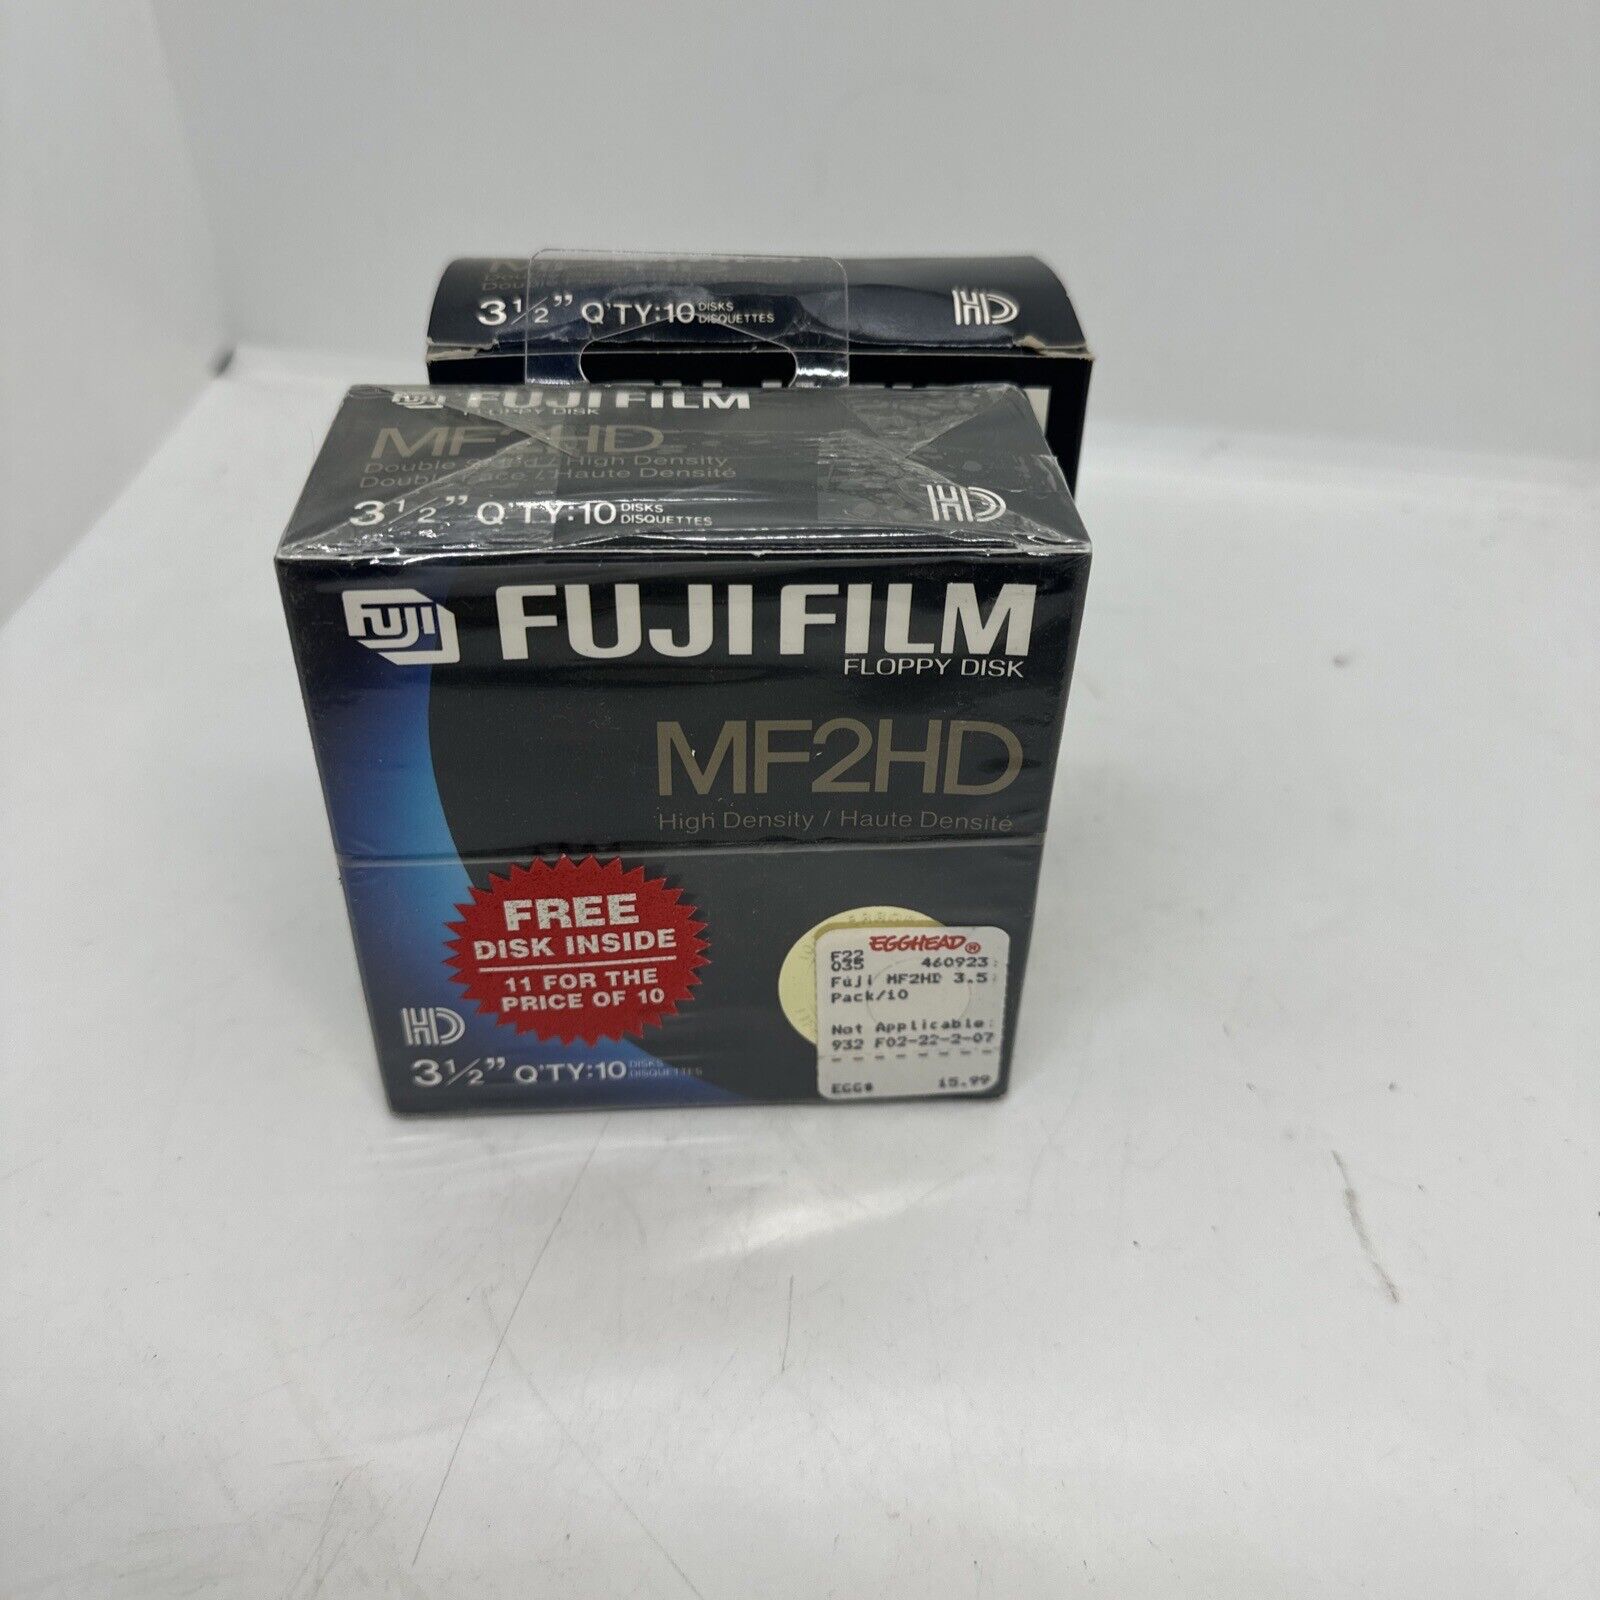 Fujifilm Floppy Disk MF2HD 3 1/2 inch New Pack of 10 Plus 8 More